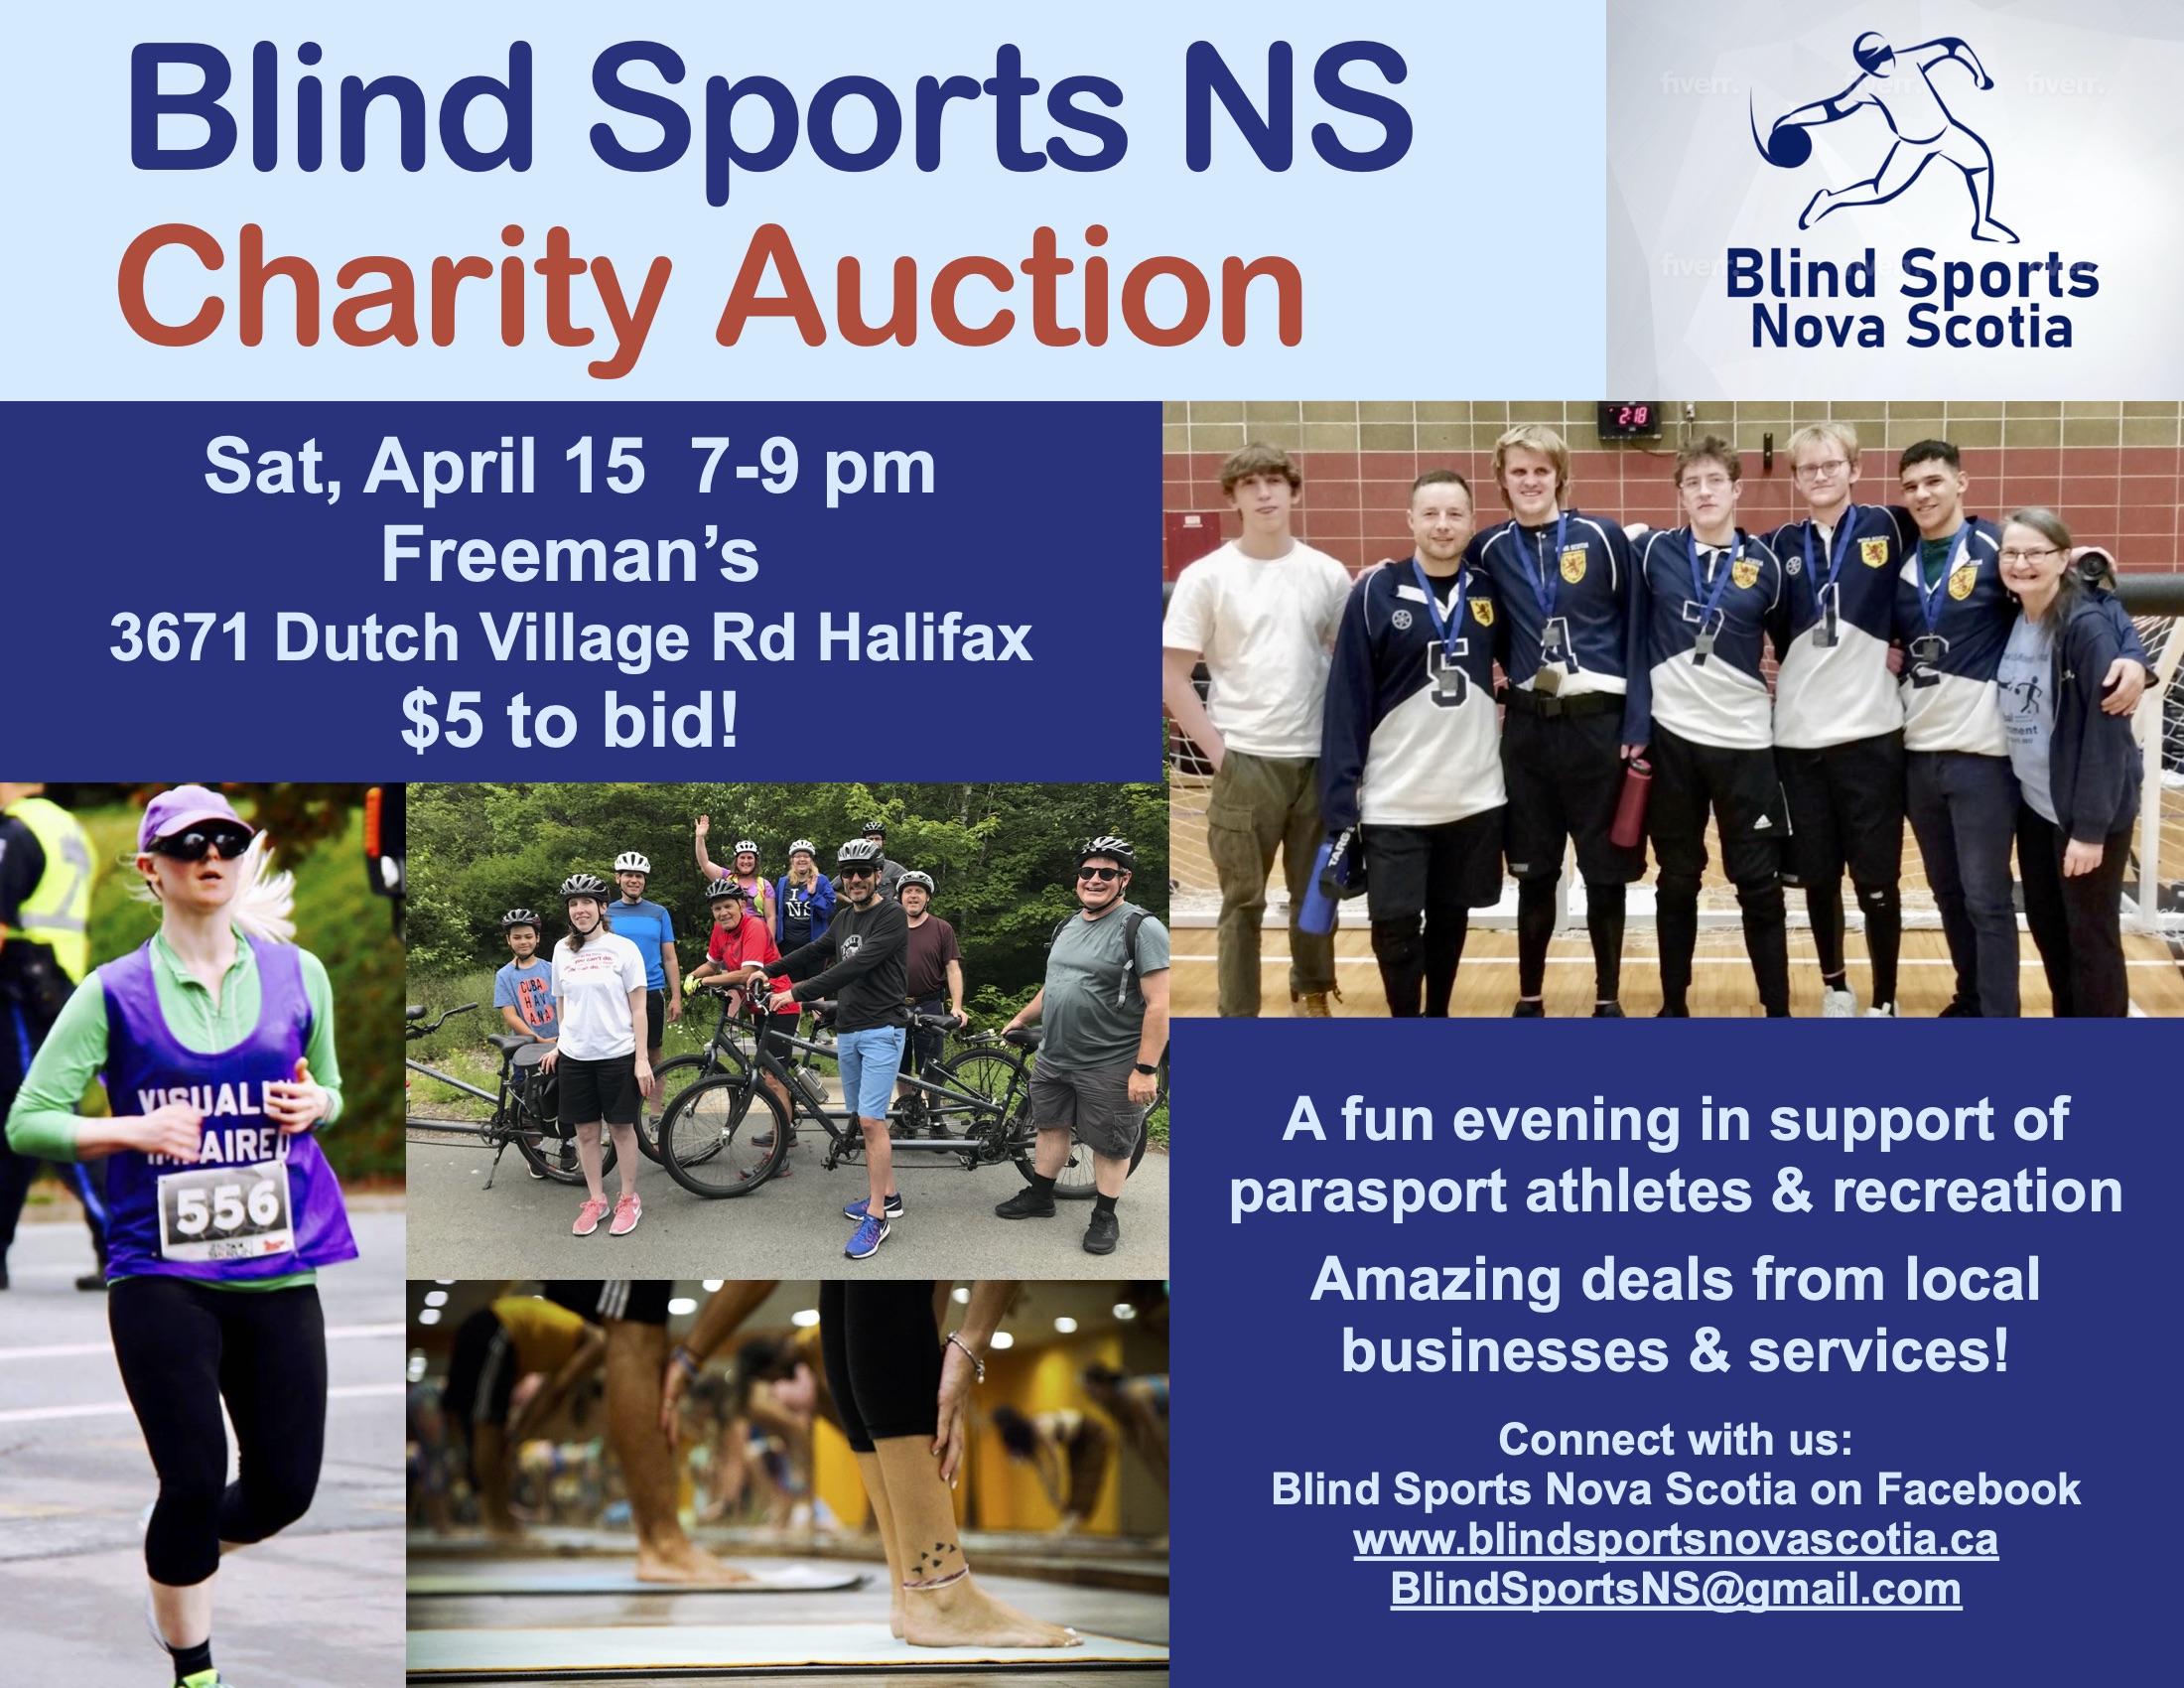 A dark and light blue colour scheme Text reads Blind Sports NS Charity Auction  To the right, Blind Sports Nova Scotia logo, including outline of person throwing a goalball Text reads Sat, April 15  7-9 pm Freeman’s 3671 Dutch Village Rd Halifax $5 to bid!    A fun evening in support of parasport athletes & recreation Amazing deals from local businesses & services! Connect with us:  Blind Sports Nova Scotia on Facebook www.blindsportsnovascotia.ca BlindSportsNS@gmail.com Photo 1 - a group of athletes wearing medals and smiling  Photo 2 - group of cyclists stand next to tandem bikes outdoors  Photo 3 - ankles and feet on a yoga mat, group class  Photo 4 - a woman running in a road race with visually impaired on their shirt 